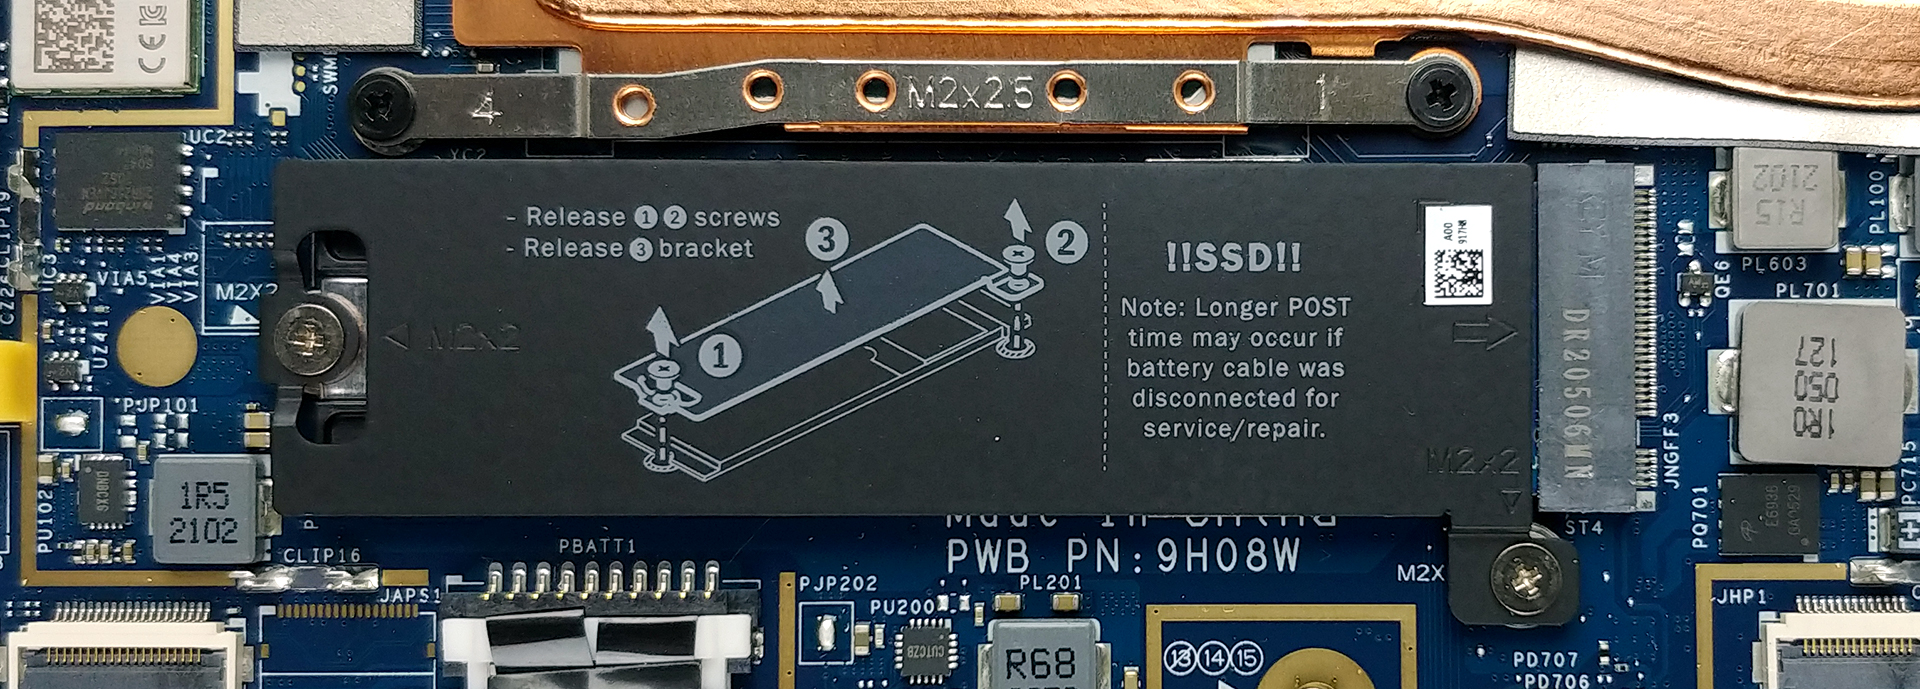 Inside Dell Latitude 14 7420 - disassembly and upgrade options |  